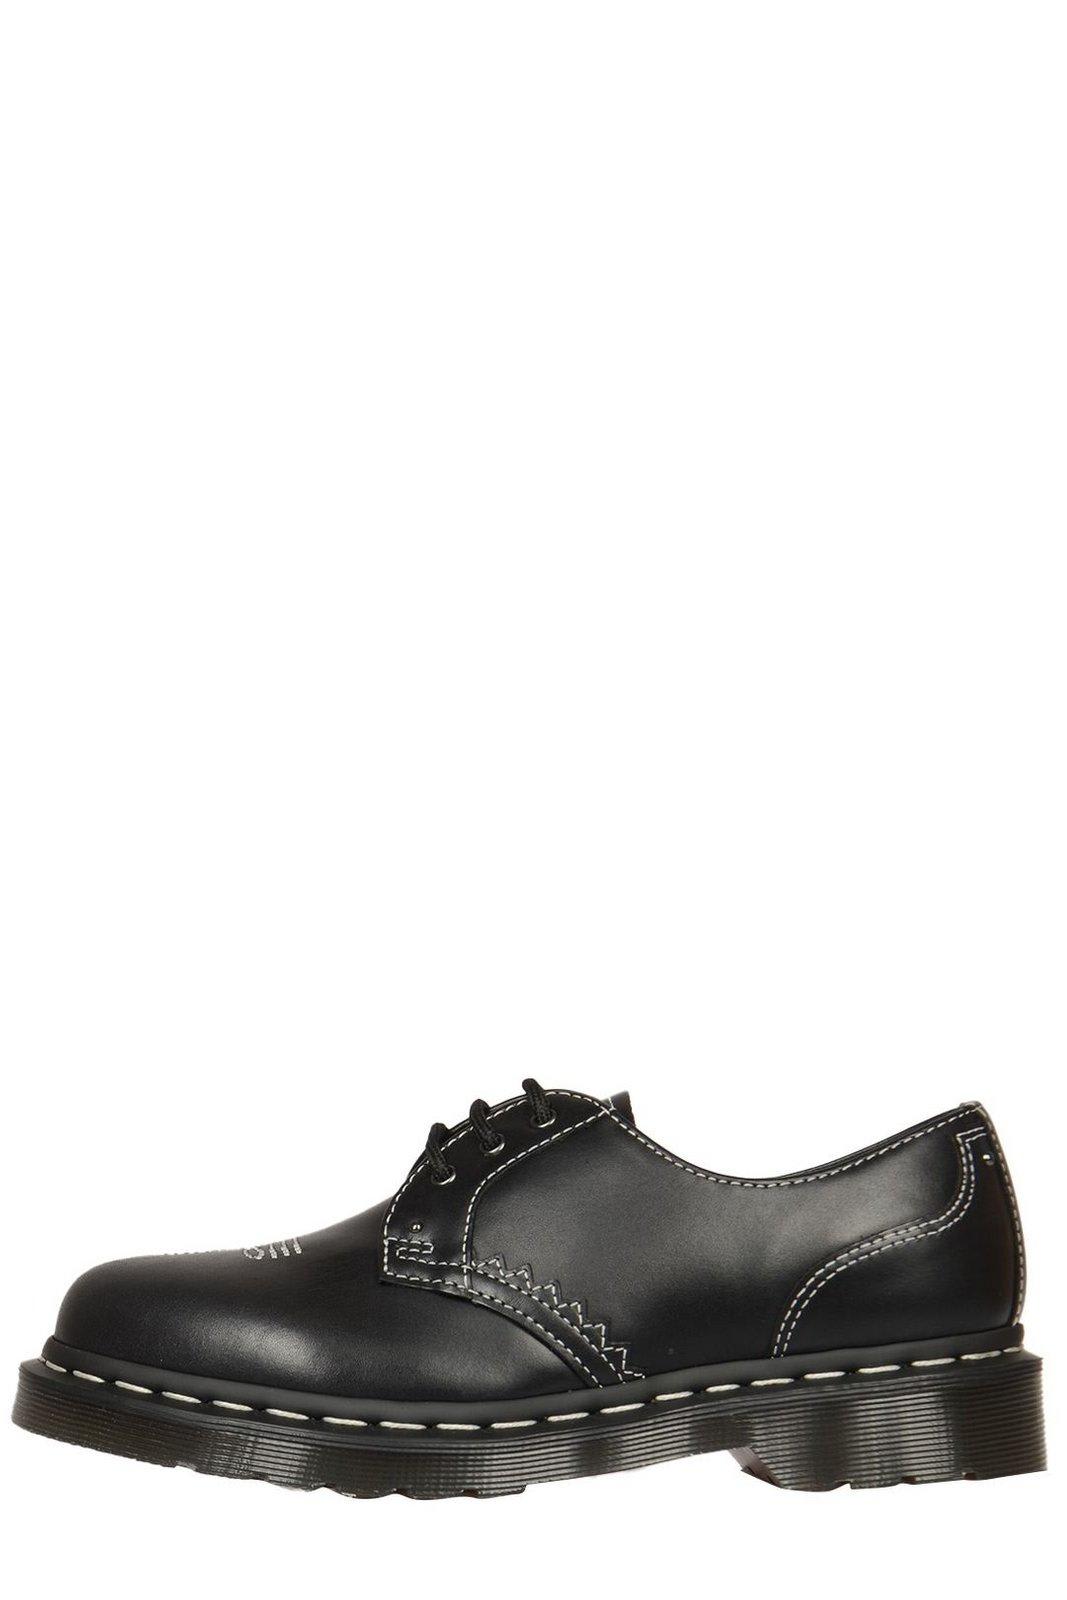 1461 Gothic Amerciana Oxford Shoes